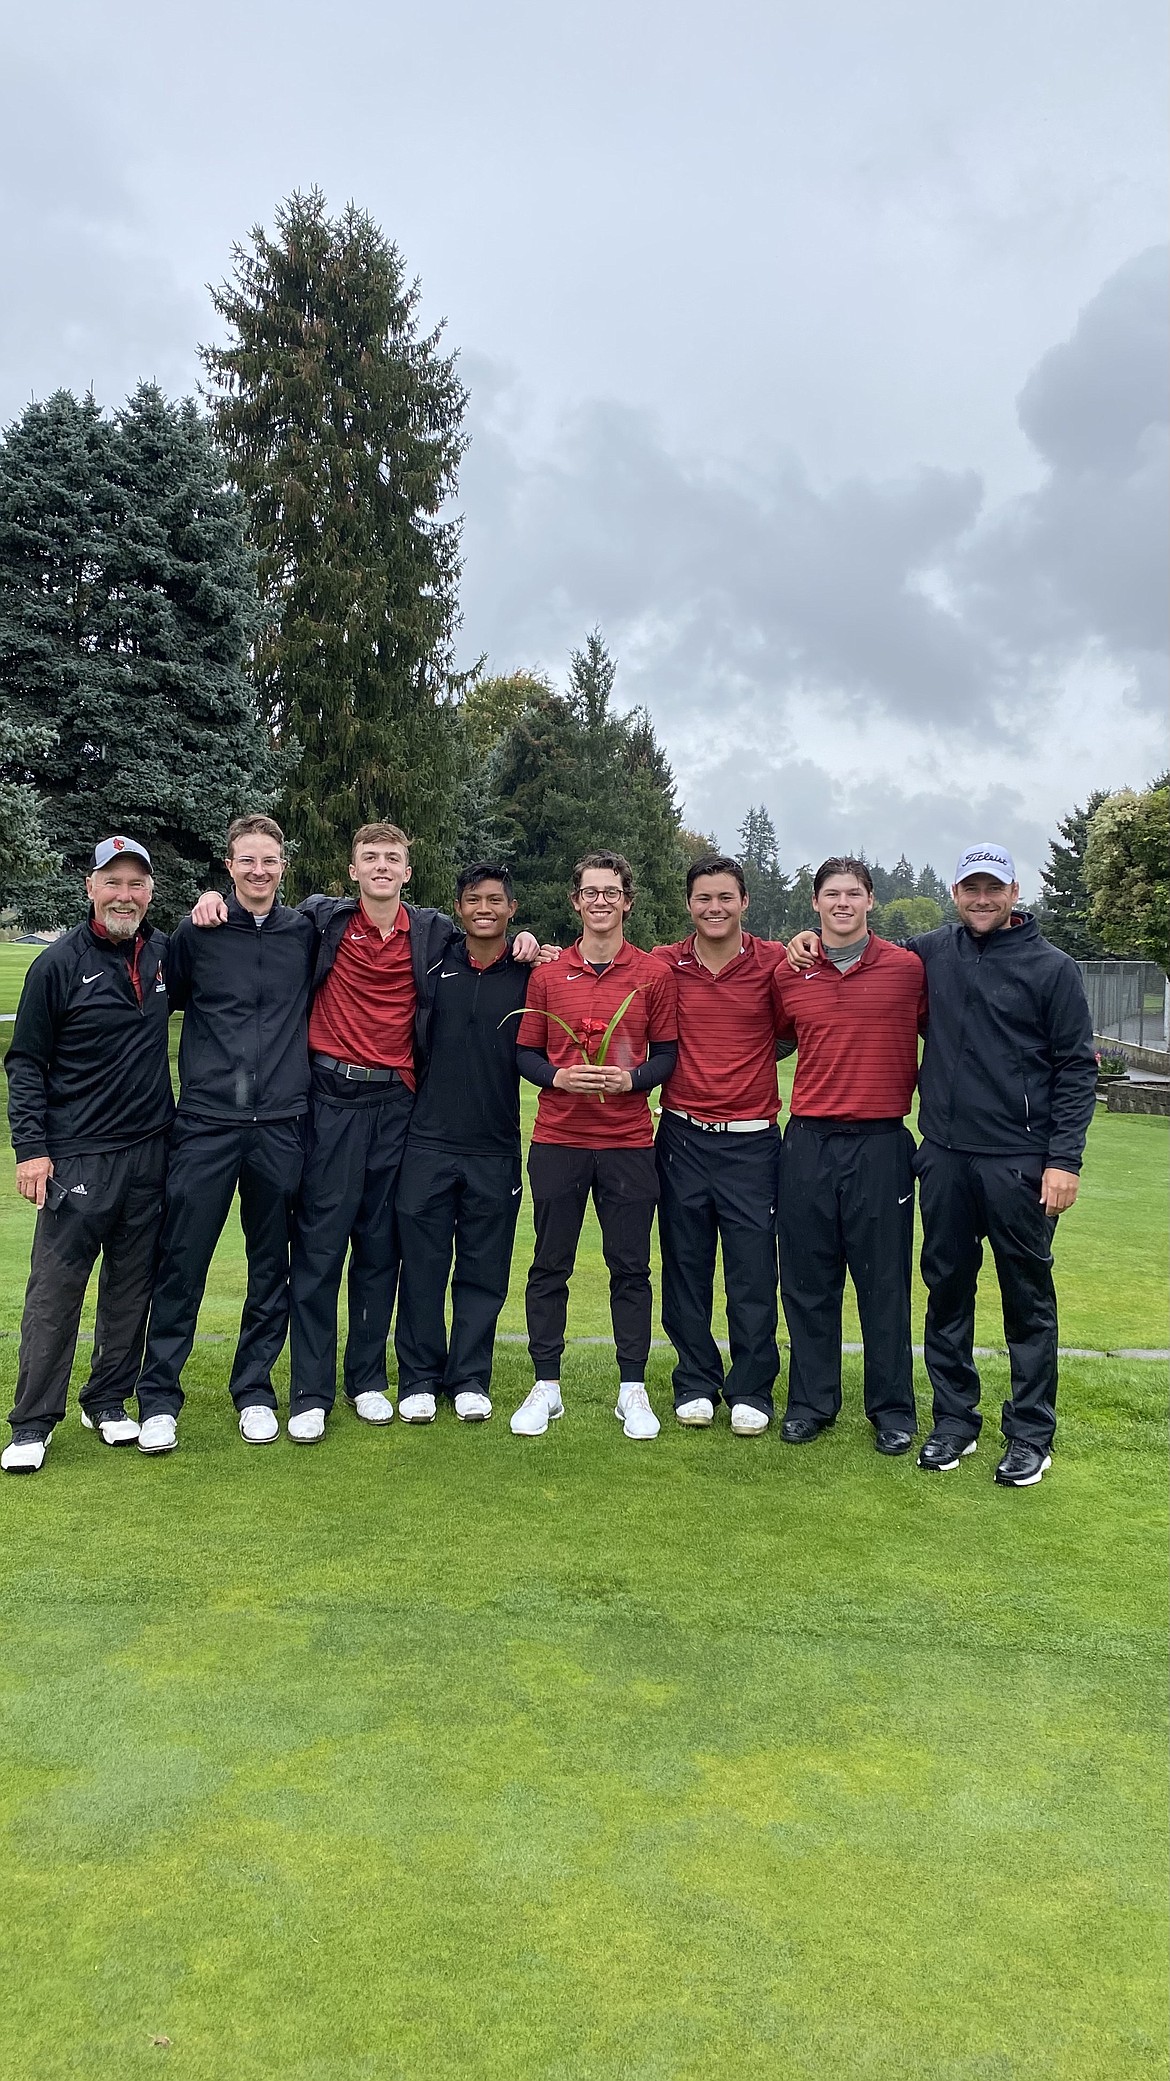 Photo courtesy of RUSSELL GROVE
The North Idaho College men's golf team captured the team title at the Multnomah Invitational on Tuesday at Club Green Meadows Golf Club in Vancouver, Wash. From left, are: assistant coach Russ Grove, Tyler Vassar, James Baldauf, Xavier De La Rosa, James Swan, Aidan Goldstein, Jamen Parsons and head coach Russell Grove.